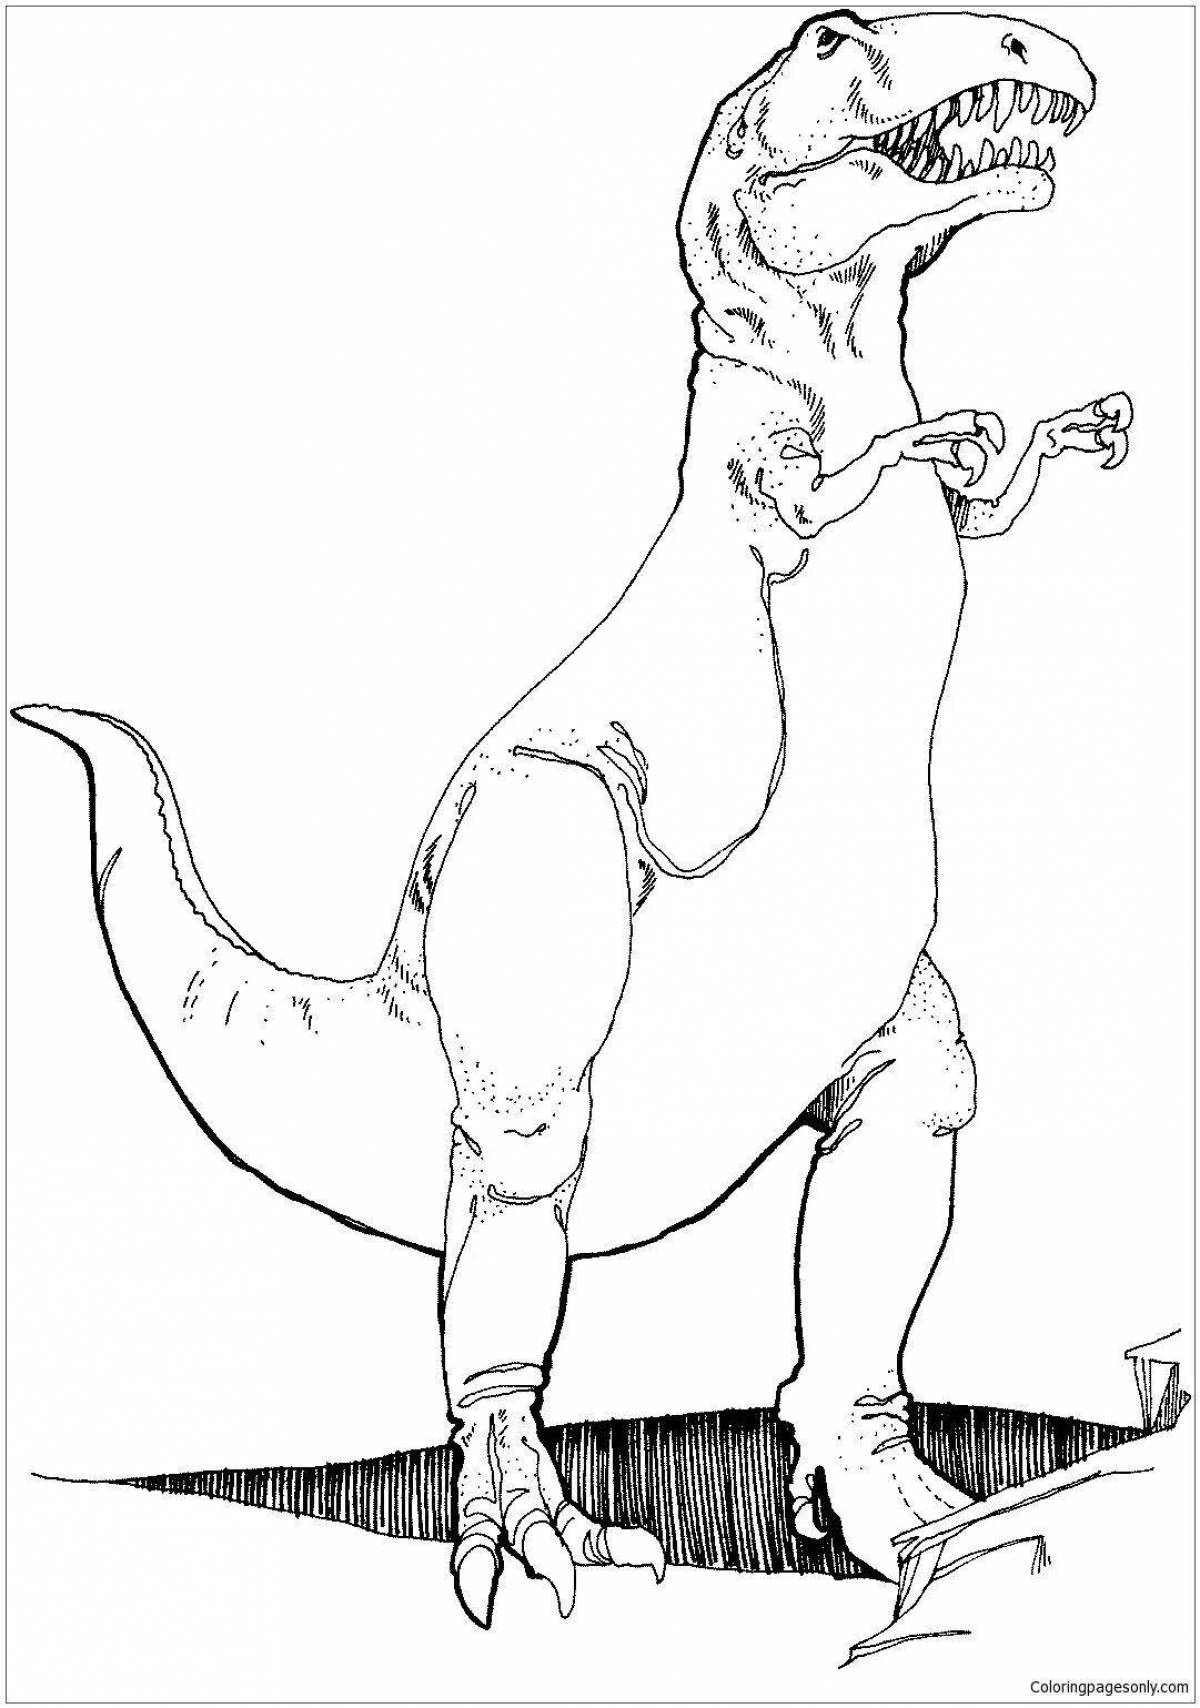 Colorful t-rex coloring page